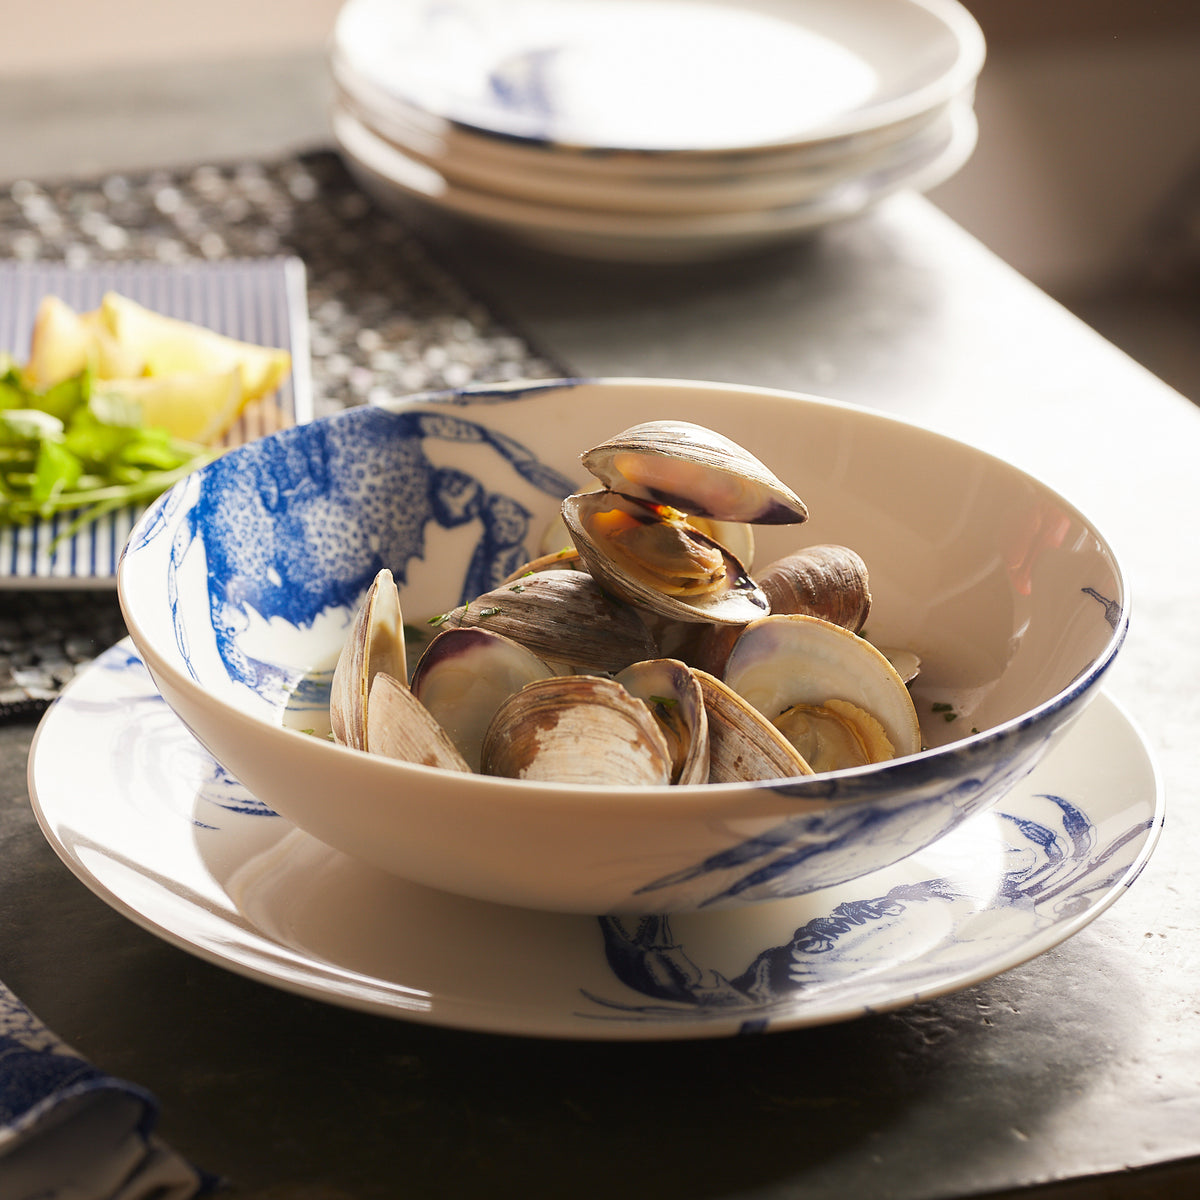 A blue and white crab patterned generous soup bowl from Caskata holds steamed clams.